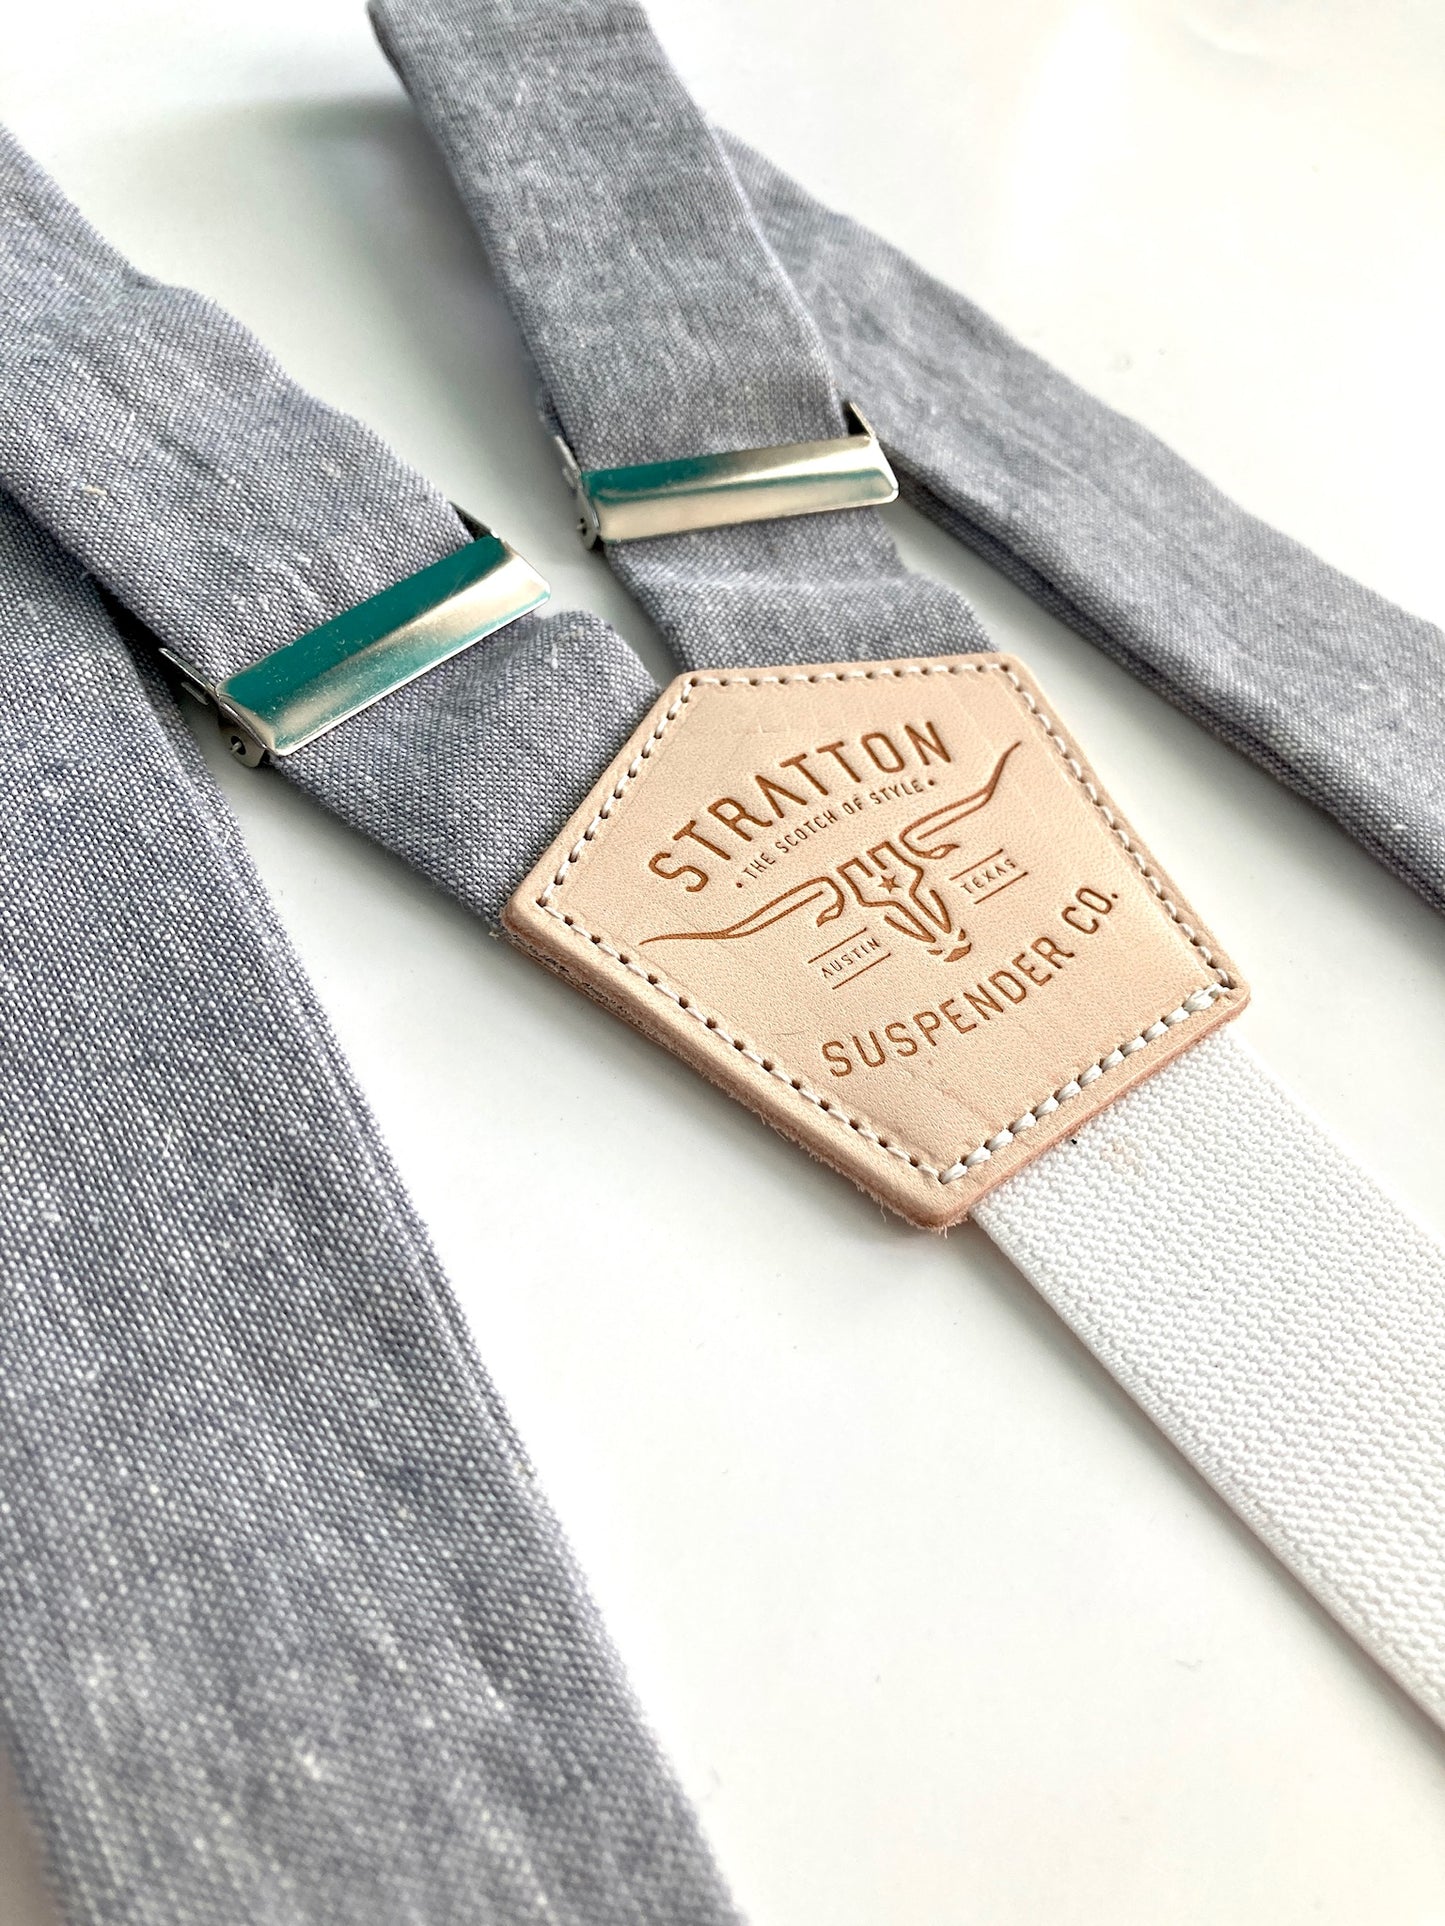 Steel Gray Linen Button On Suspenders Set - Spring Collection Stratton Suspender Co.